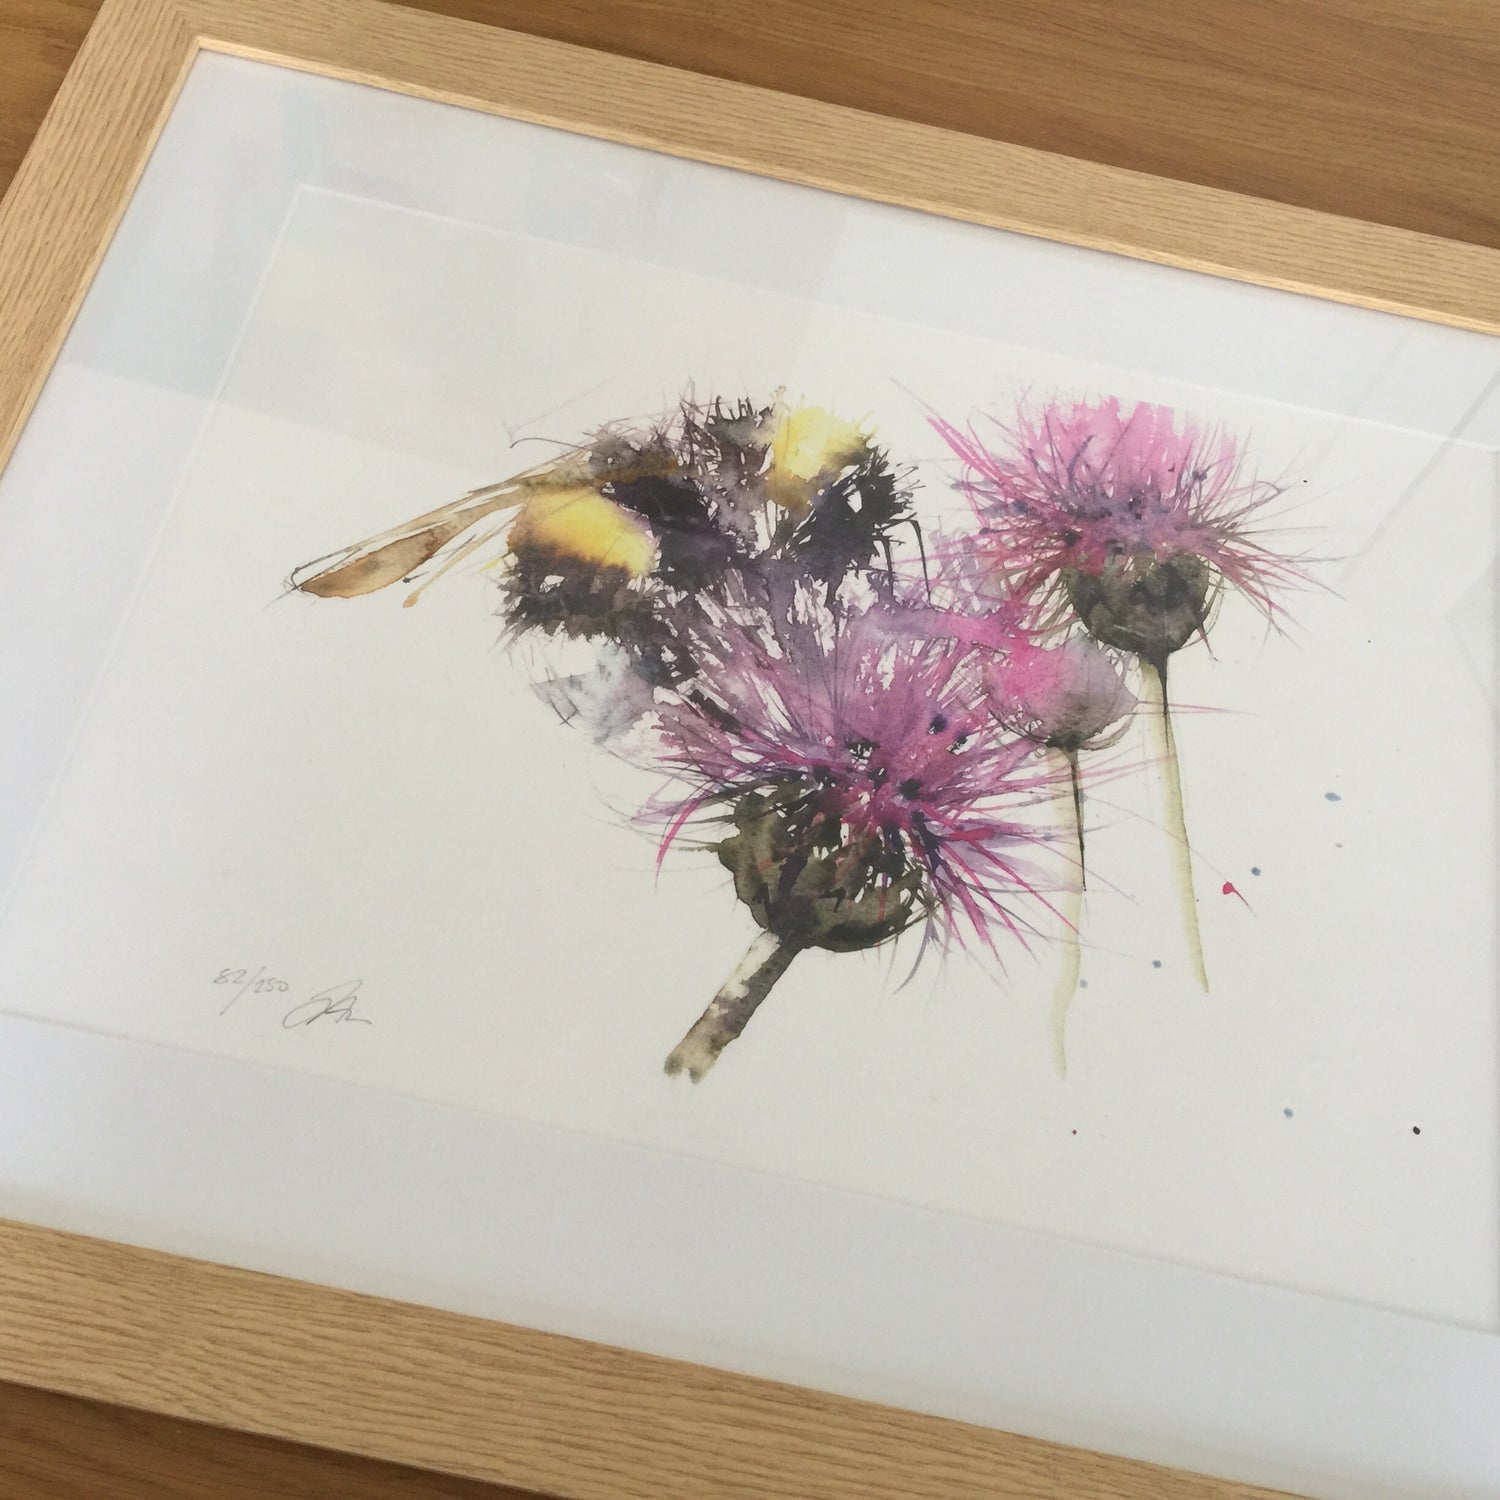 Set your print off with a lovely frame and mount.